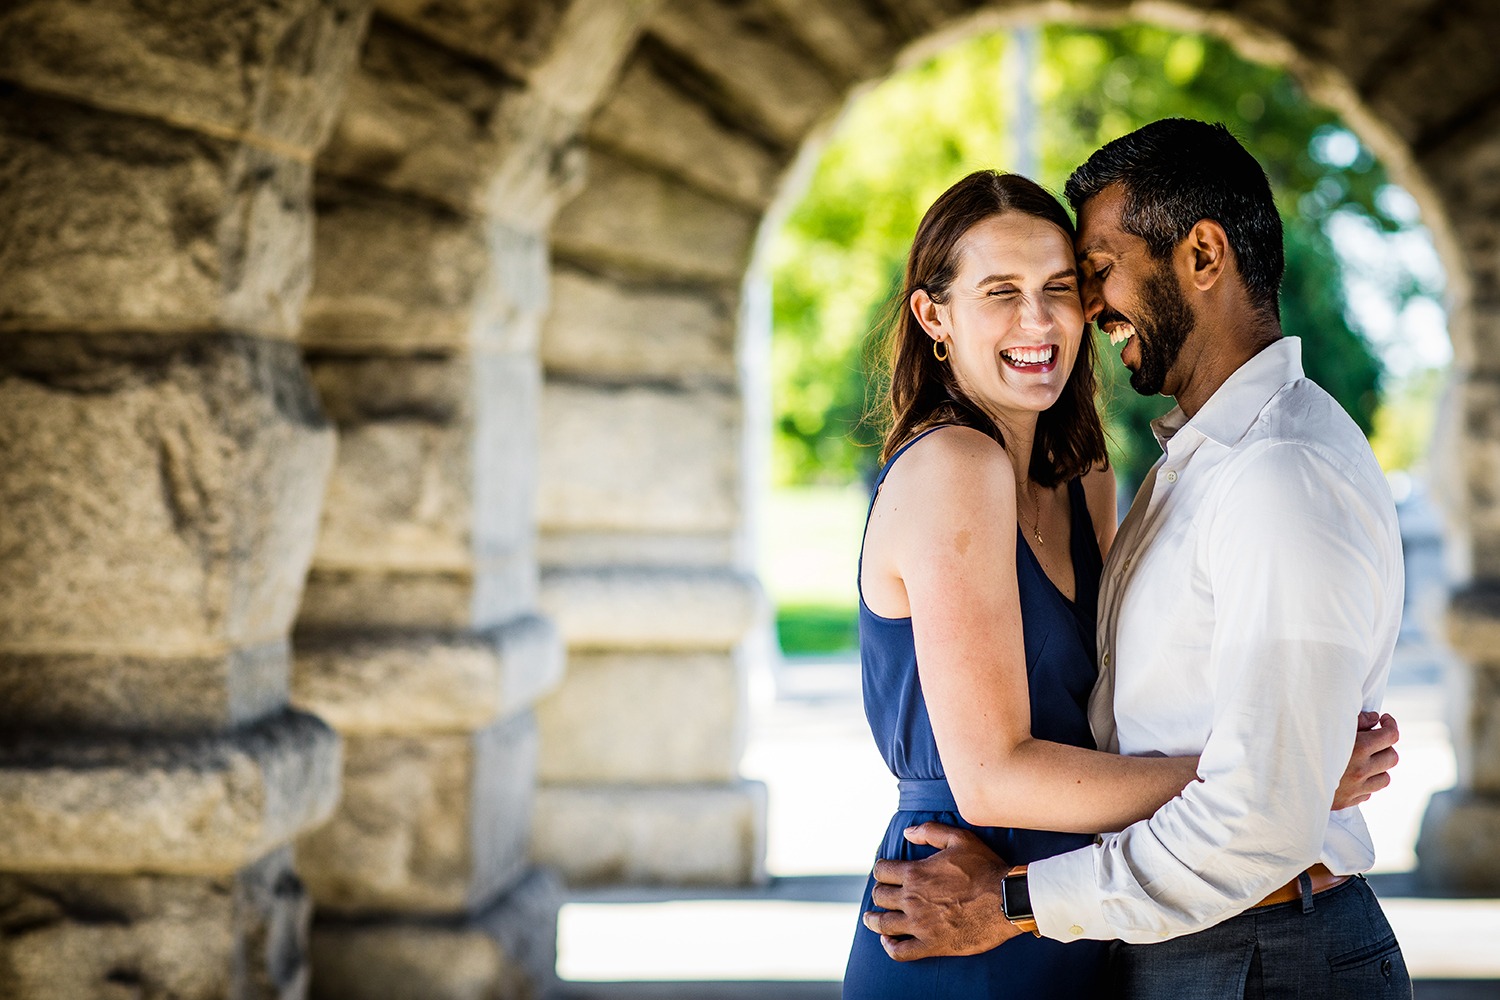 A couple laughs together during the Lincoln Park engagement session.